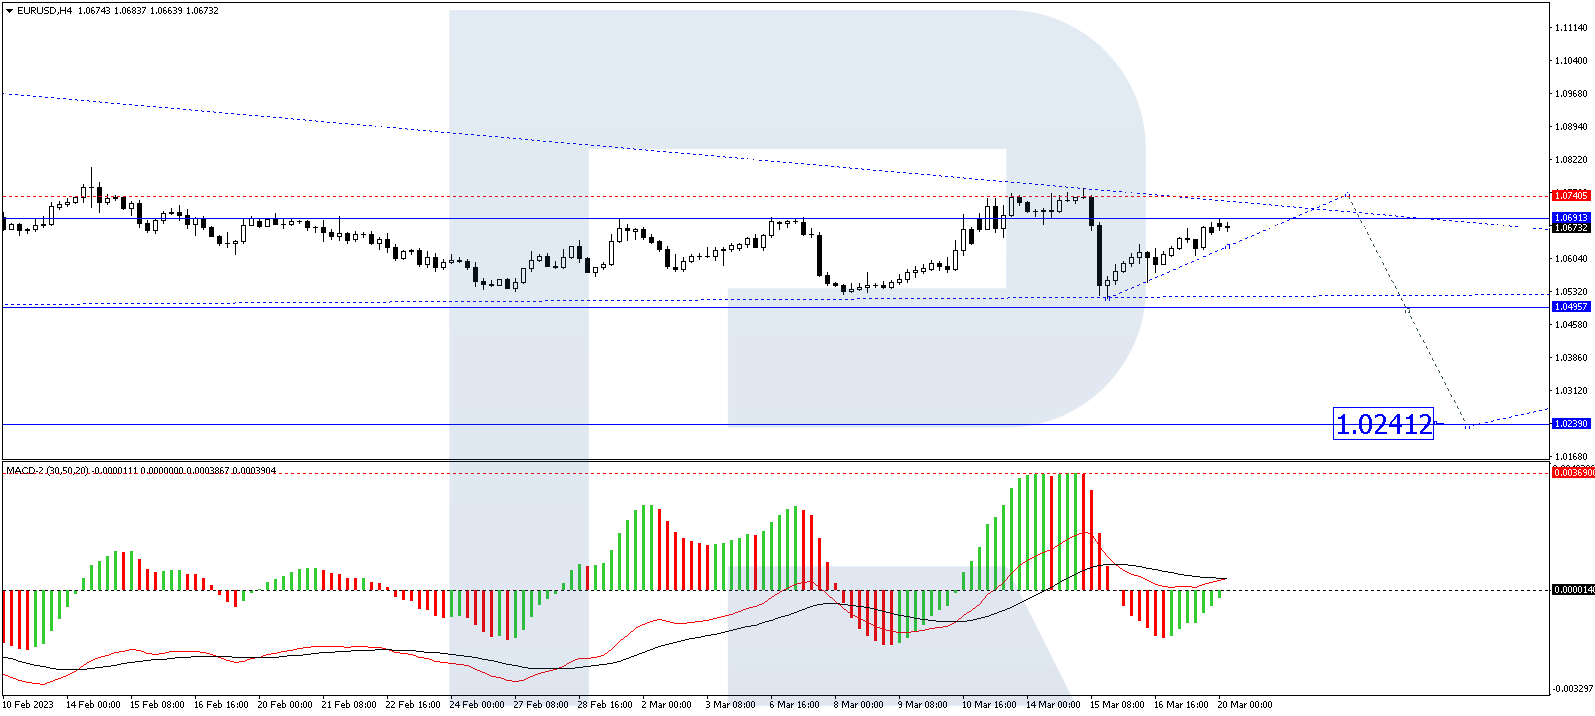 On H4, EUR/USD has formed a correctional structure to 1.0630